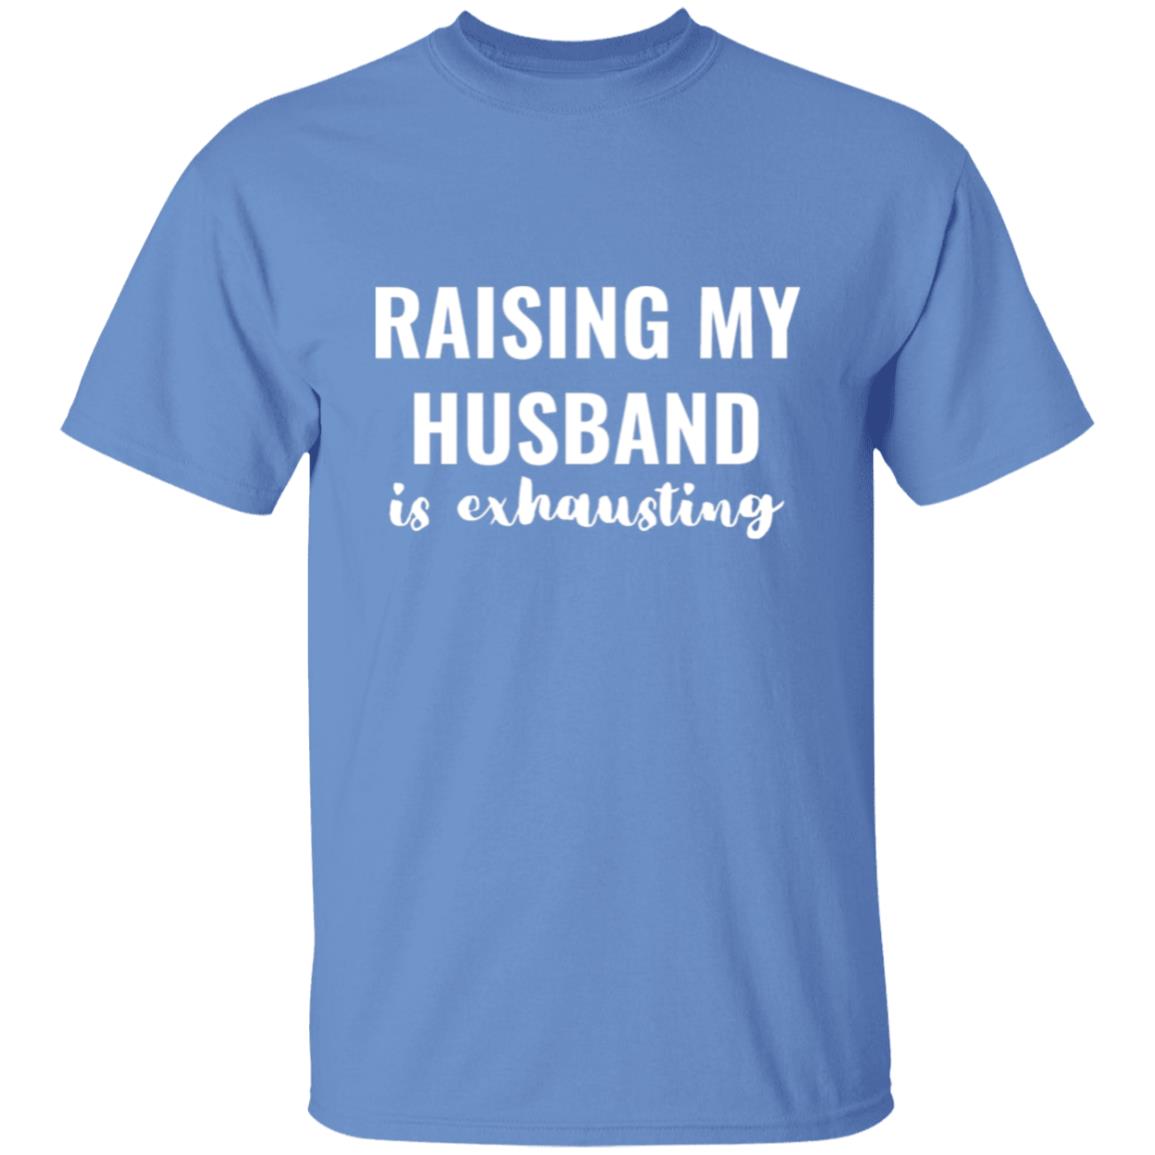 Get trendy with Raising my husband is exhausting Raising My Husband is Exhausting  T-Shirt - T-Shirts available at Good Gift Company. Grab yours for $17.95 today!